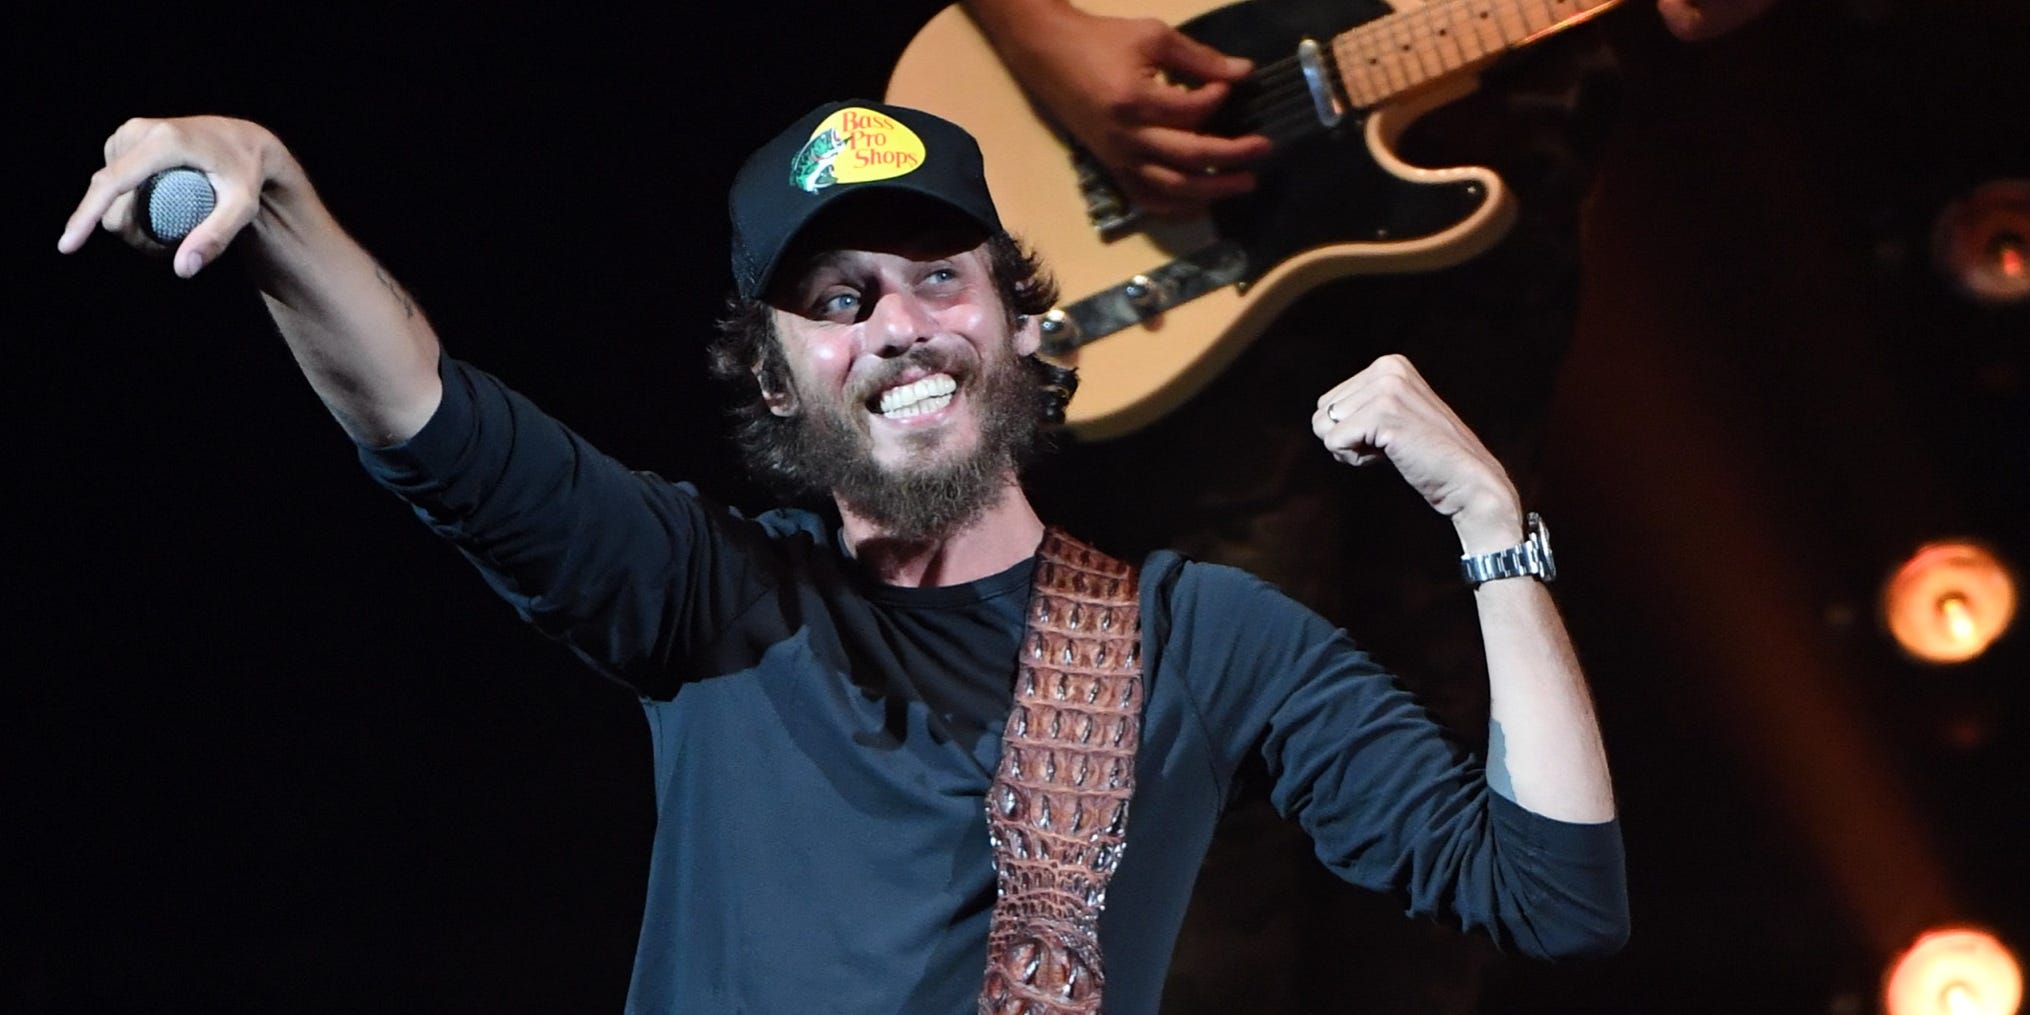 Country musician Chris Janson performs in Las Vegas wearing a Bass Pro Shops truckers hat